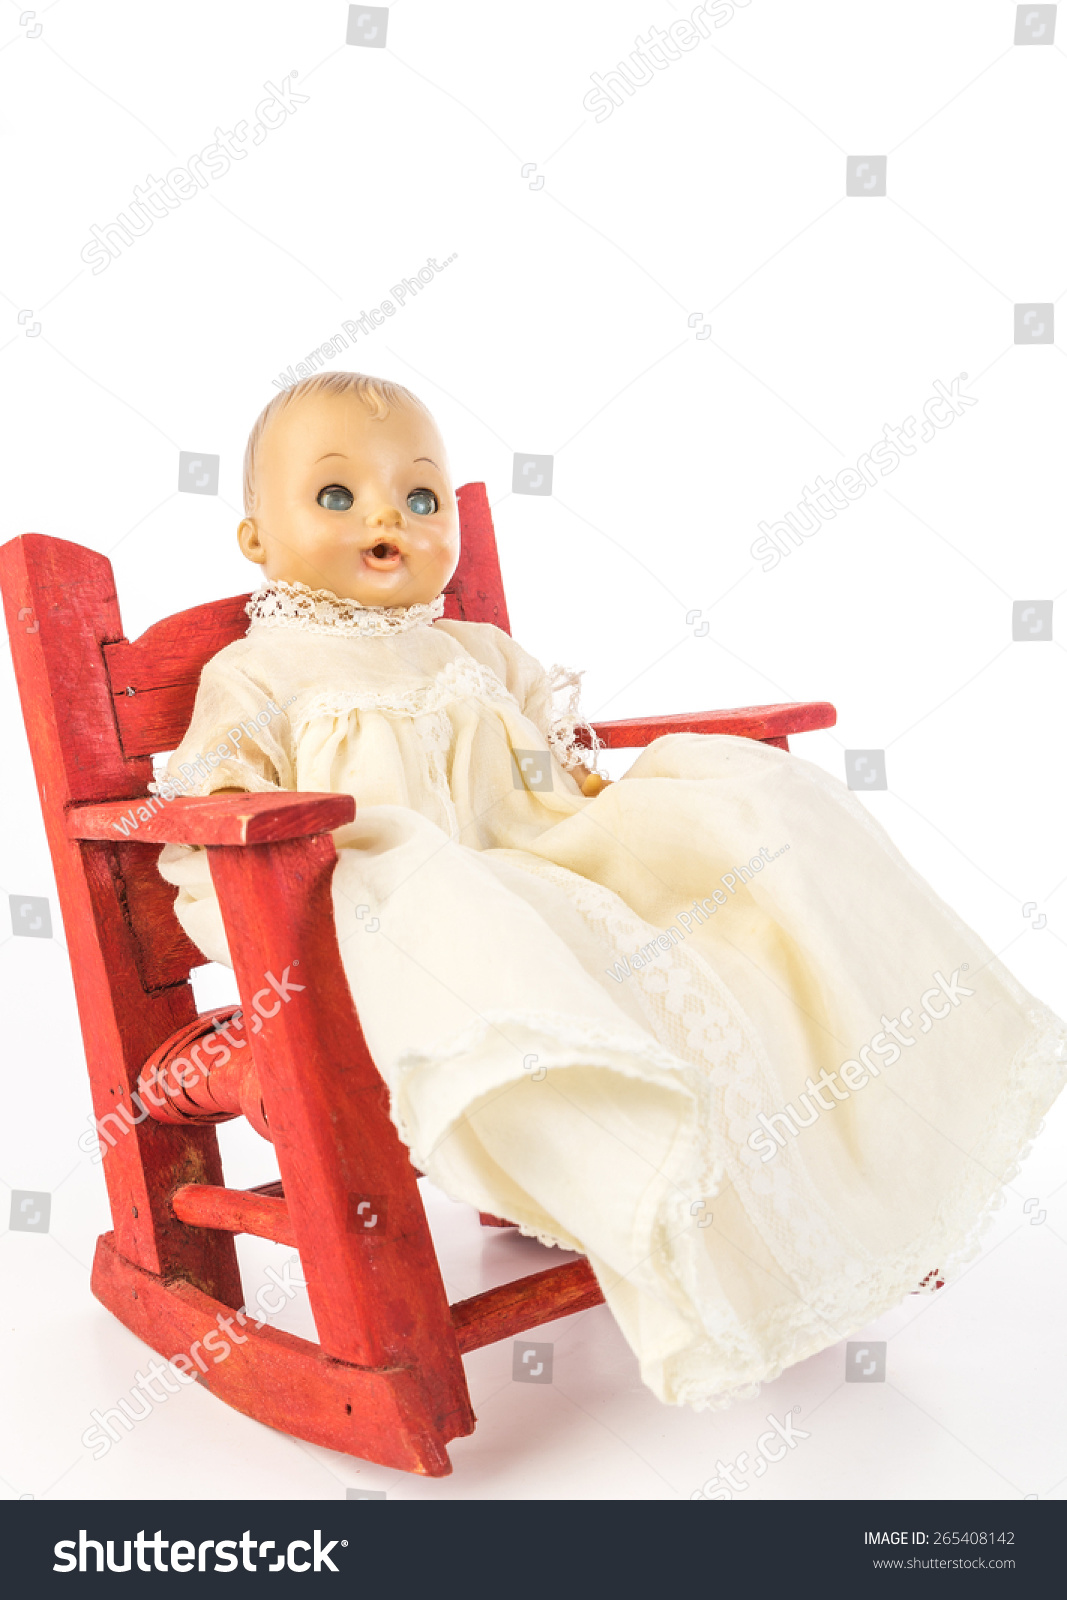 antique baby doll furniture